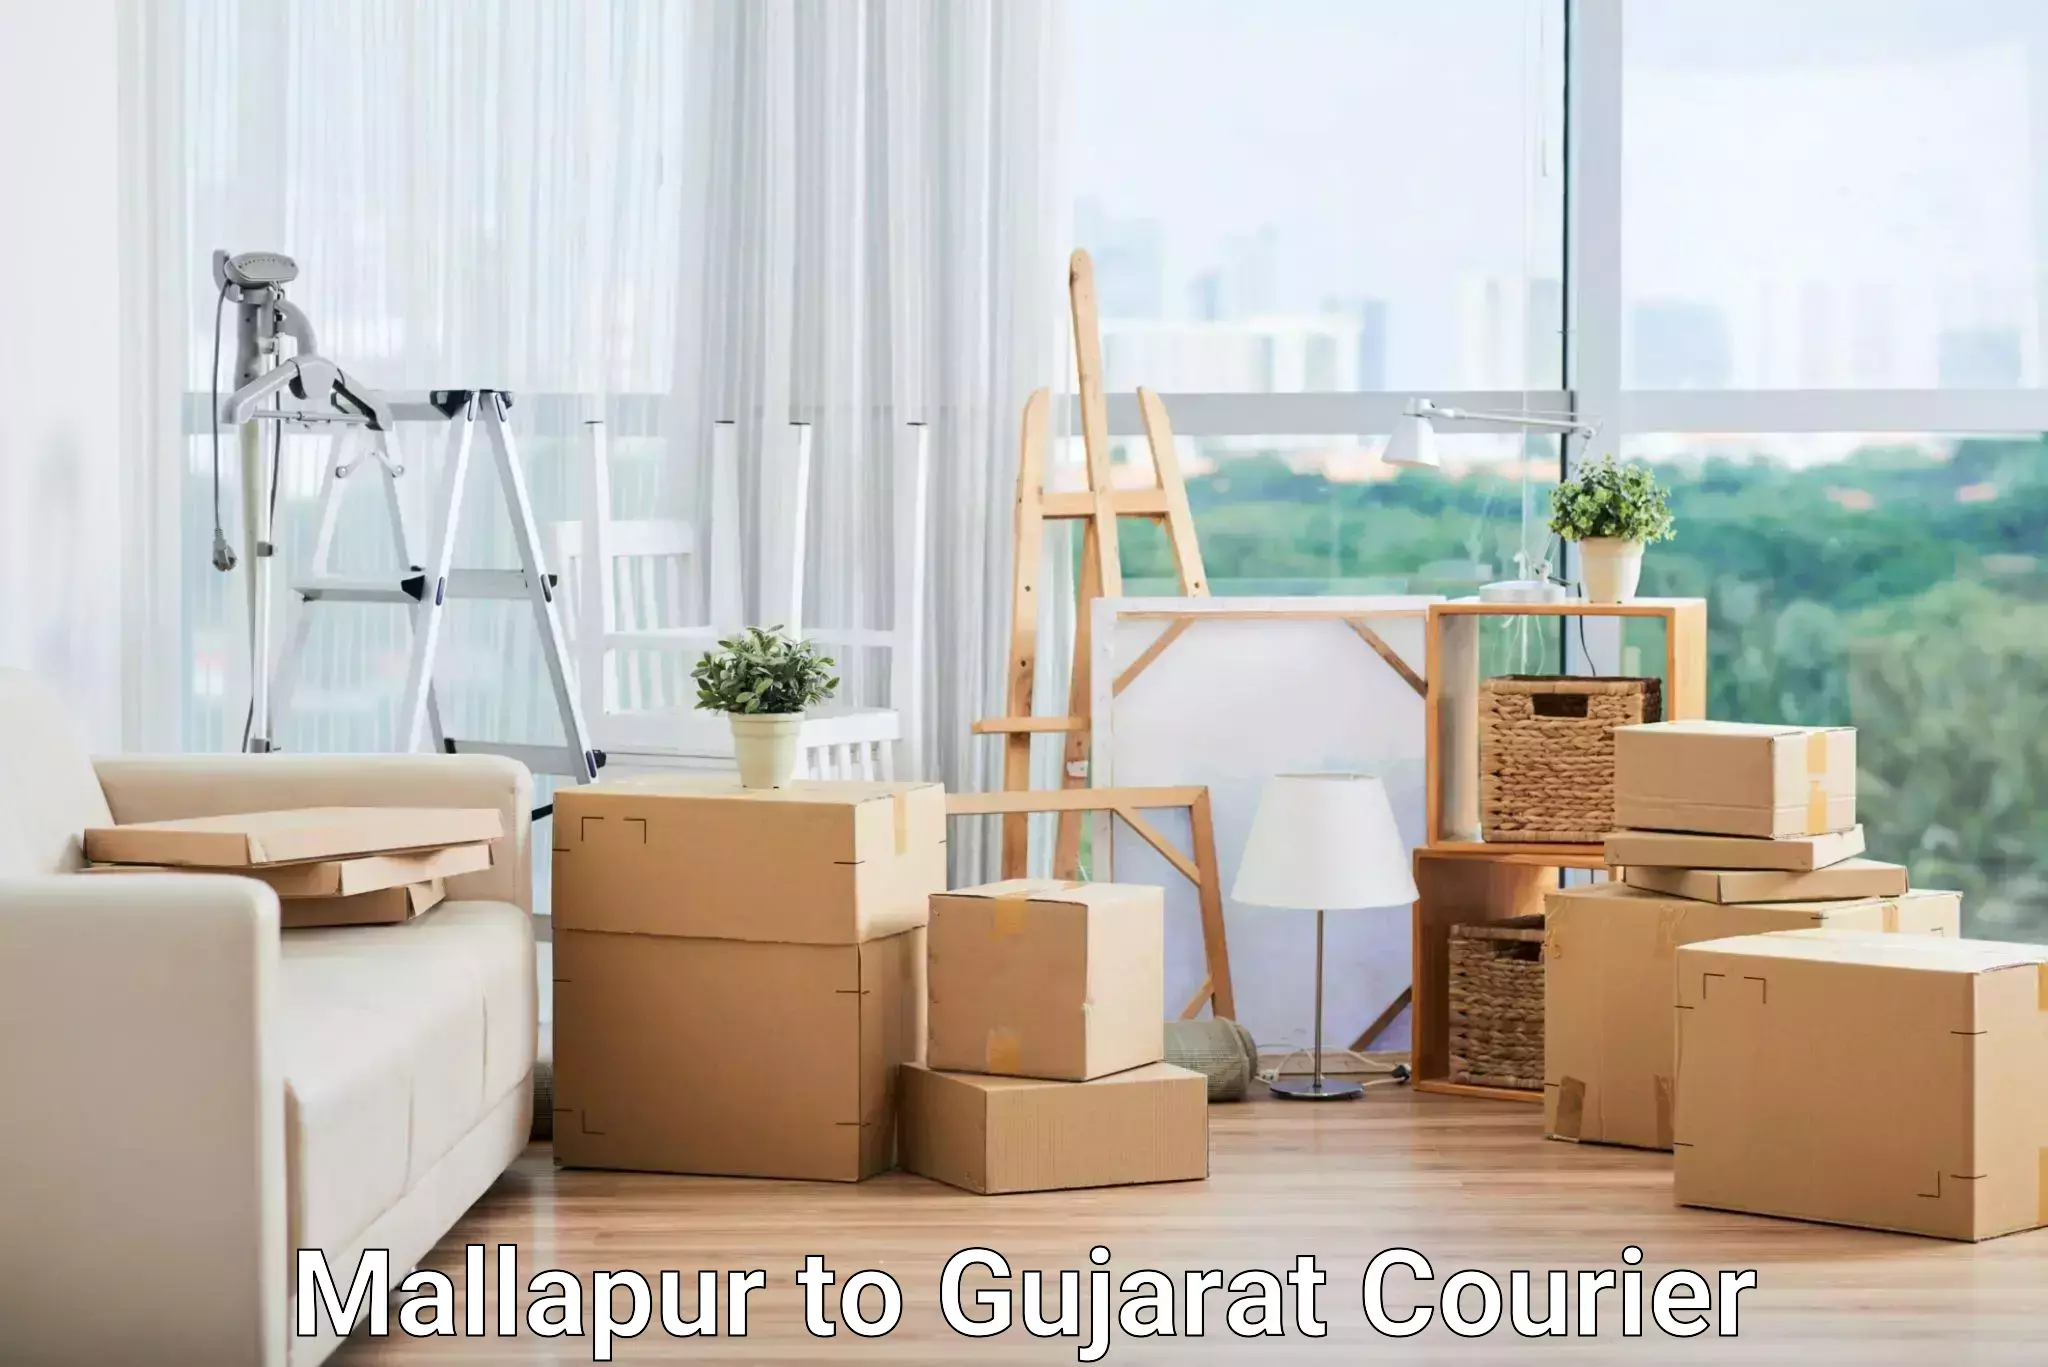 24/7 courier service in Mallapur to Anand